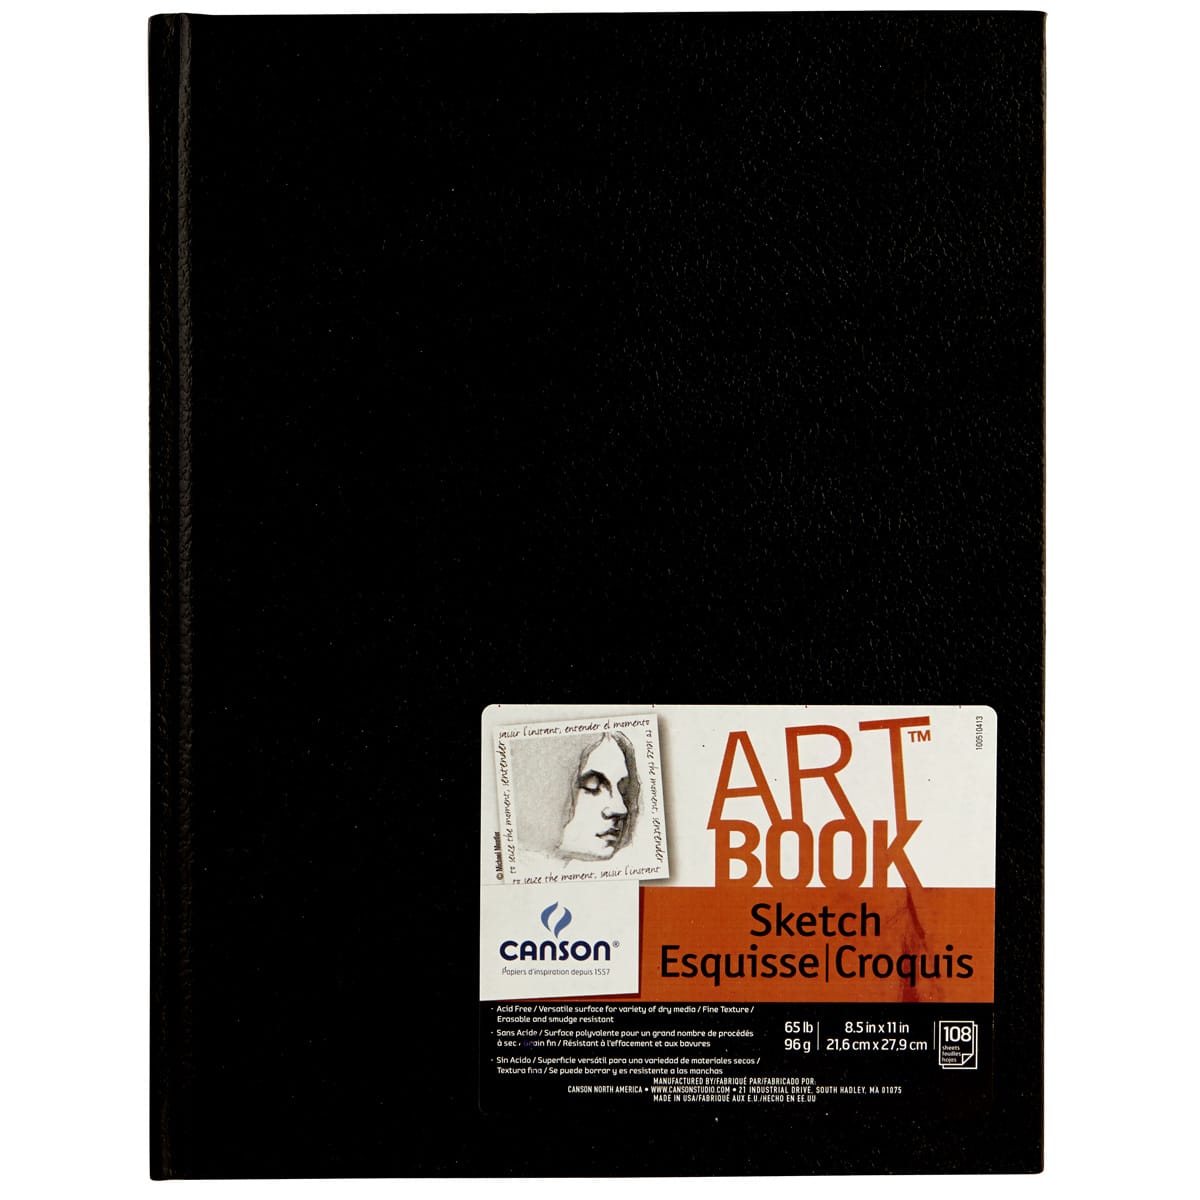 Hardcover Sketch Pad, Acid Free Sketchbooks For Drawing, Painting And  Sketching - Buy Hardcover Sketch Pad, Acid Free Sketchbooks For Drawing,  Painting And Sketching Product on